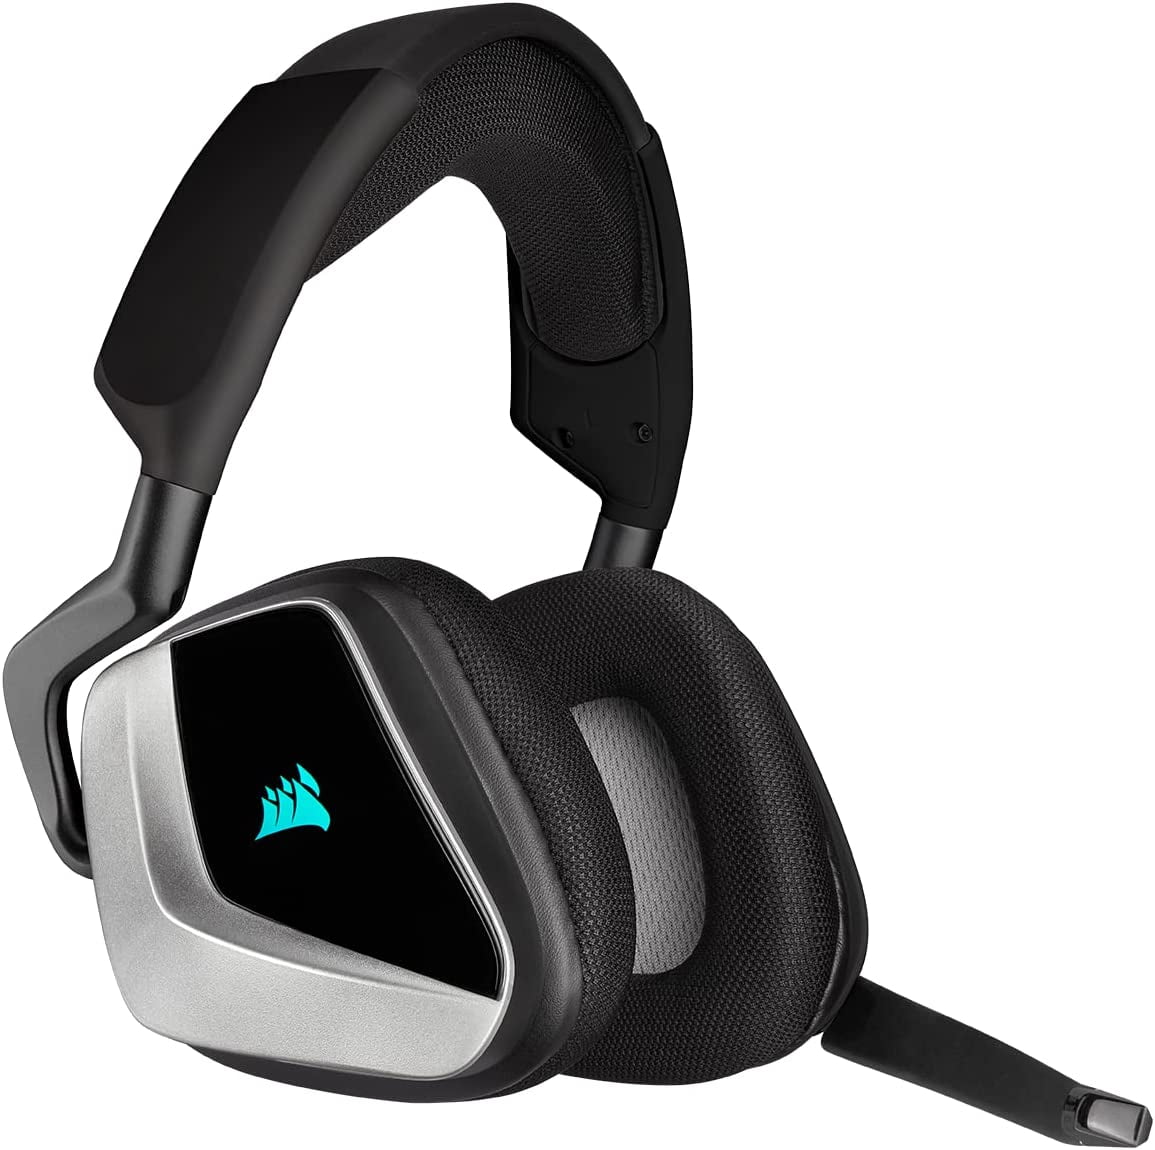 Vertrouwelijk Overeenstemming kleermaker Void RGB Elite Wireless Premium Gaming Headset with 7.1 Surround Sound -  Discord Certified - Works with PC PS5 and PS4 - Carbon (CA-9011201-NA)  Simplicity - Walmart.com